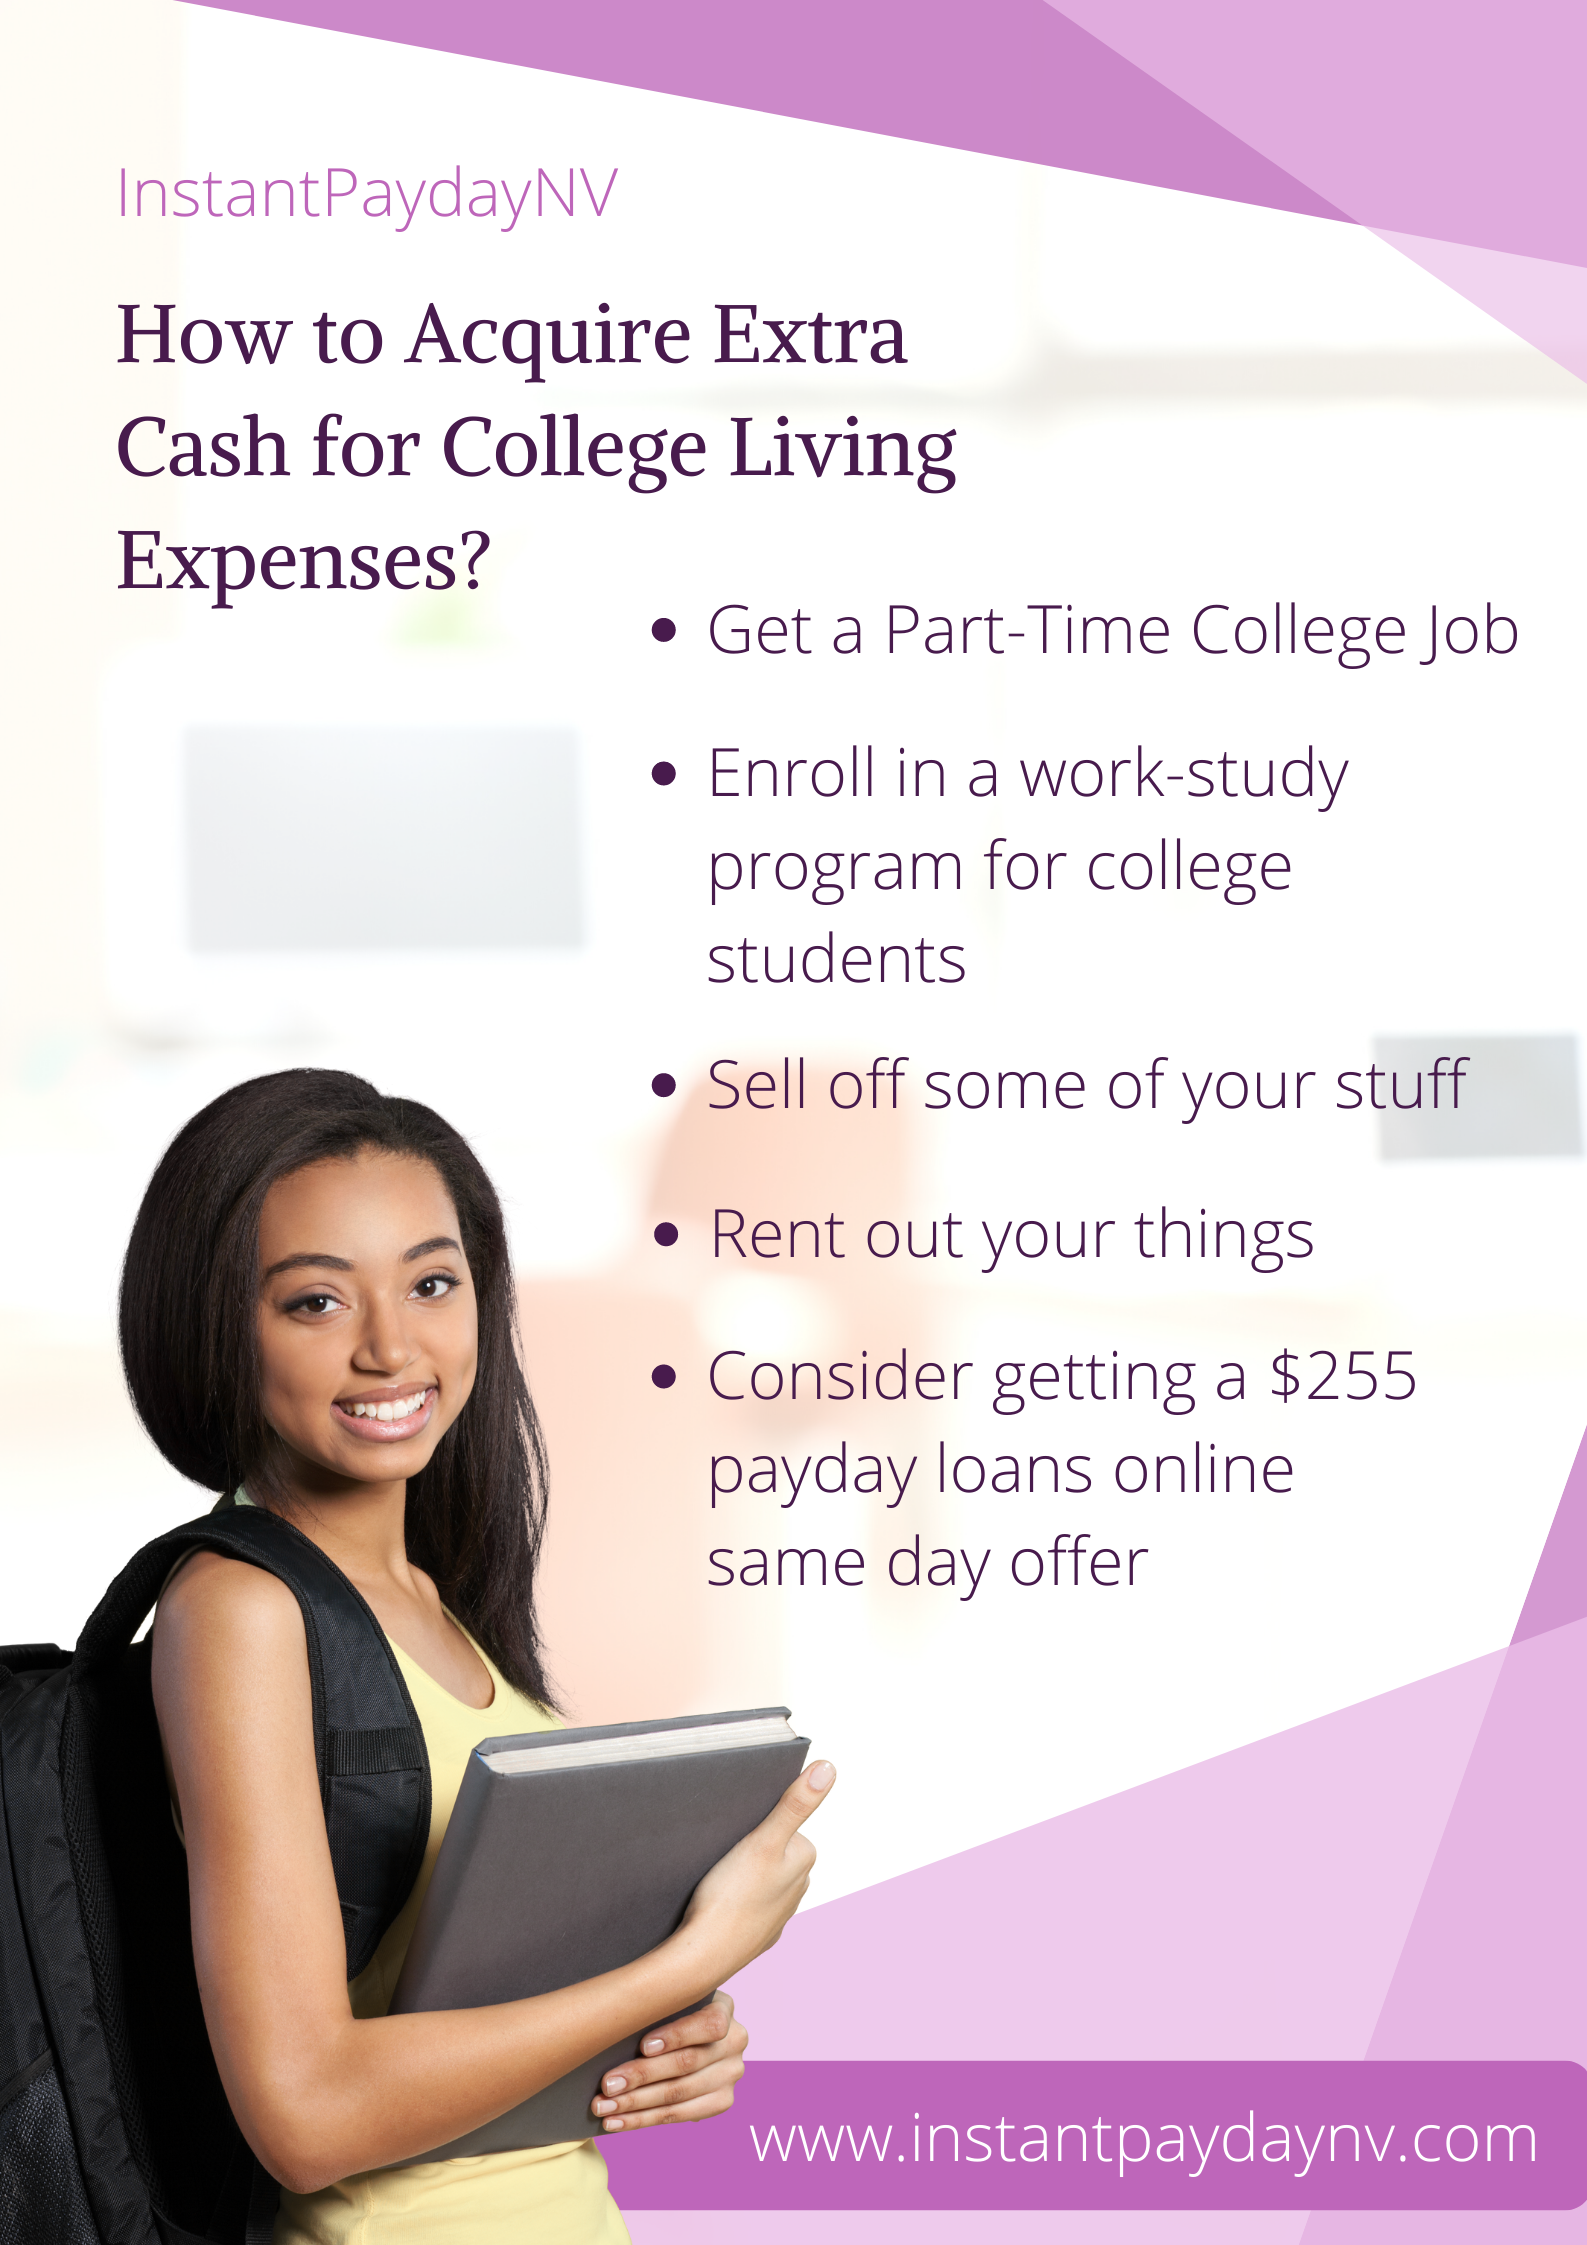 How to Acquire Extra Cash for College Living Expenses